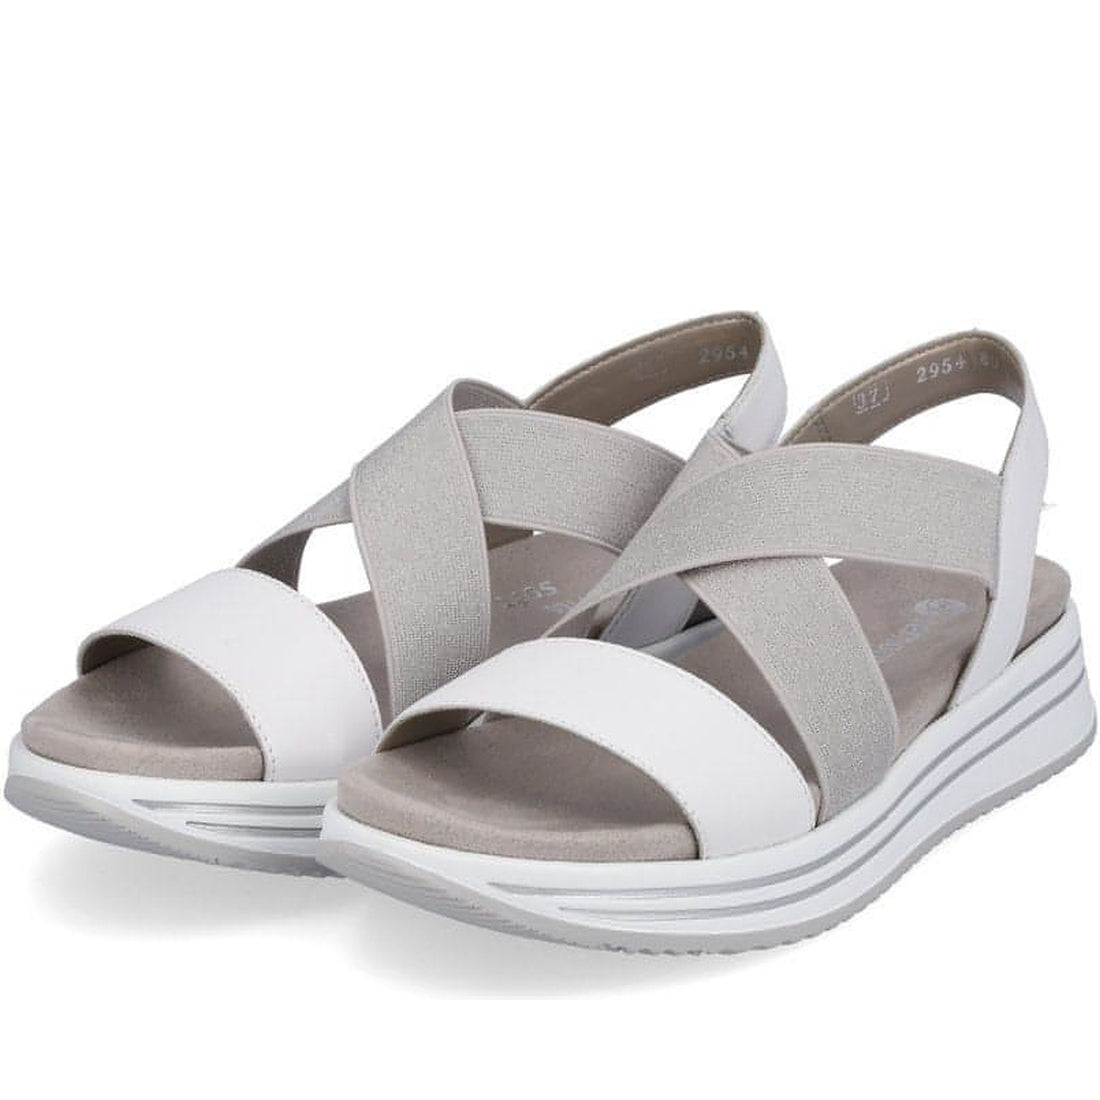 Remonte womens white casual open sandals | Vilbury London